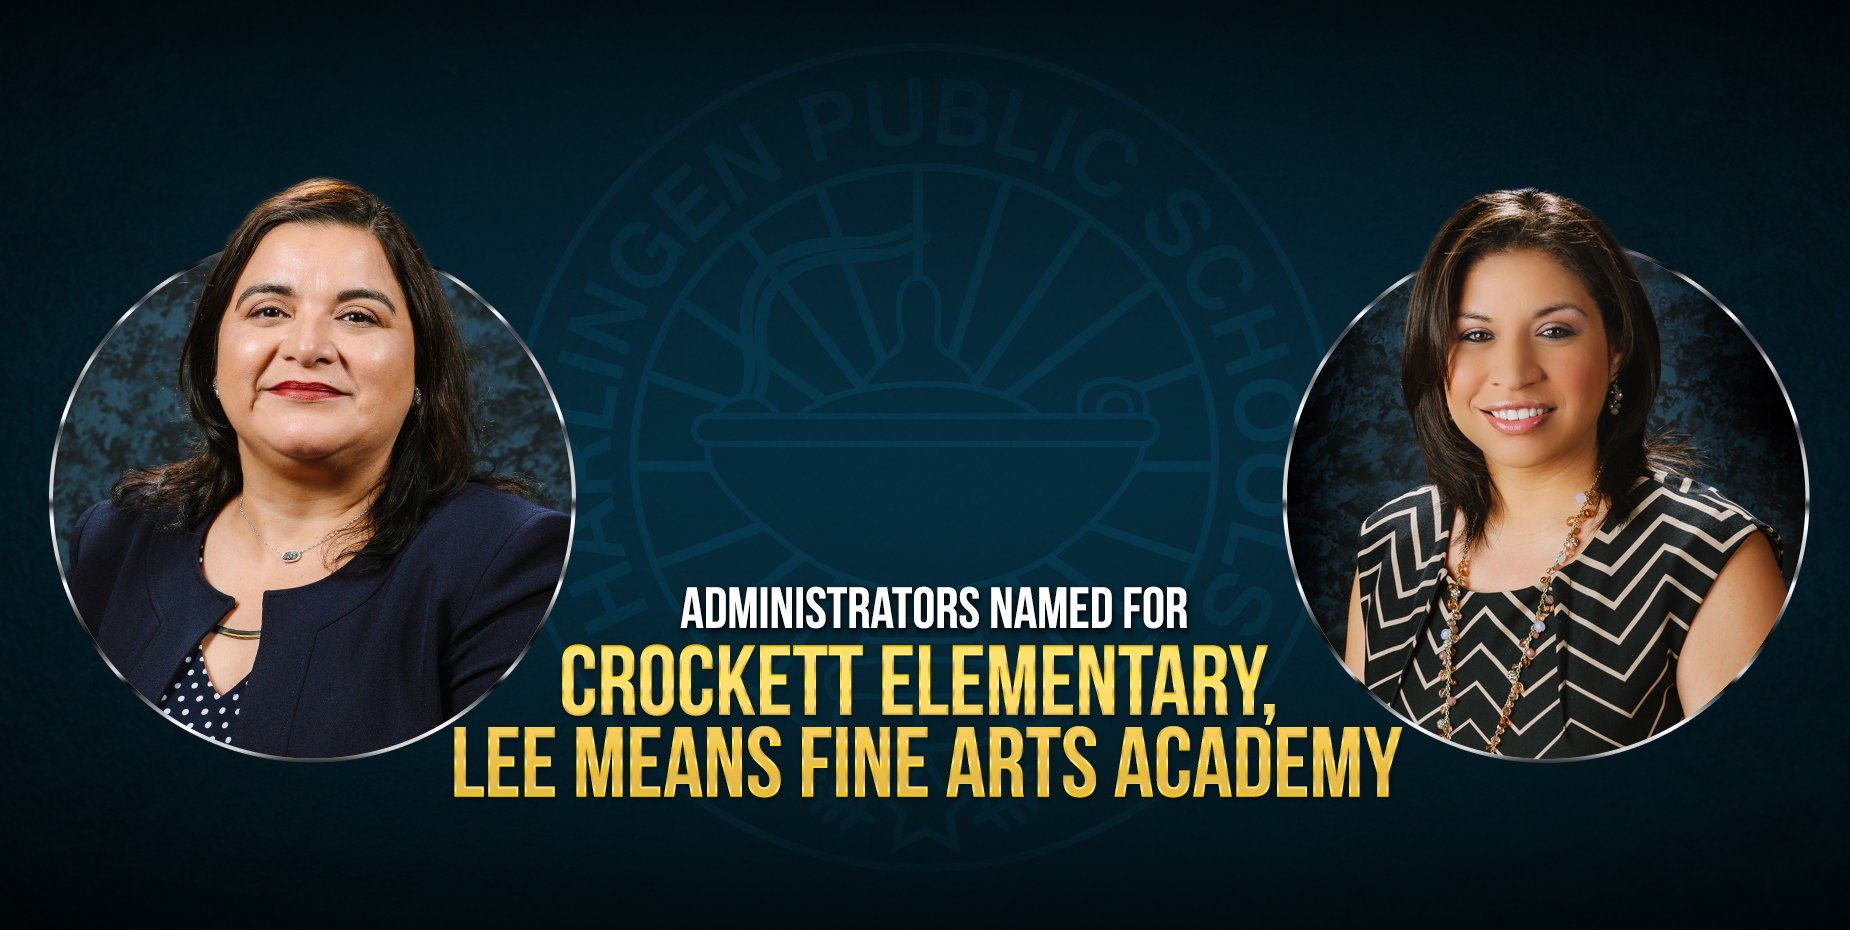 Administrators named for Crockett Elementary, Lee Means Fine Arts Academy